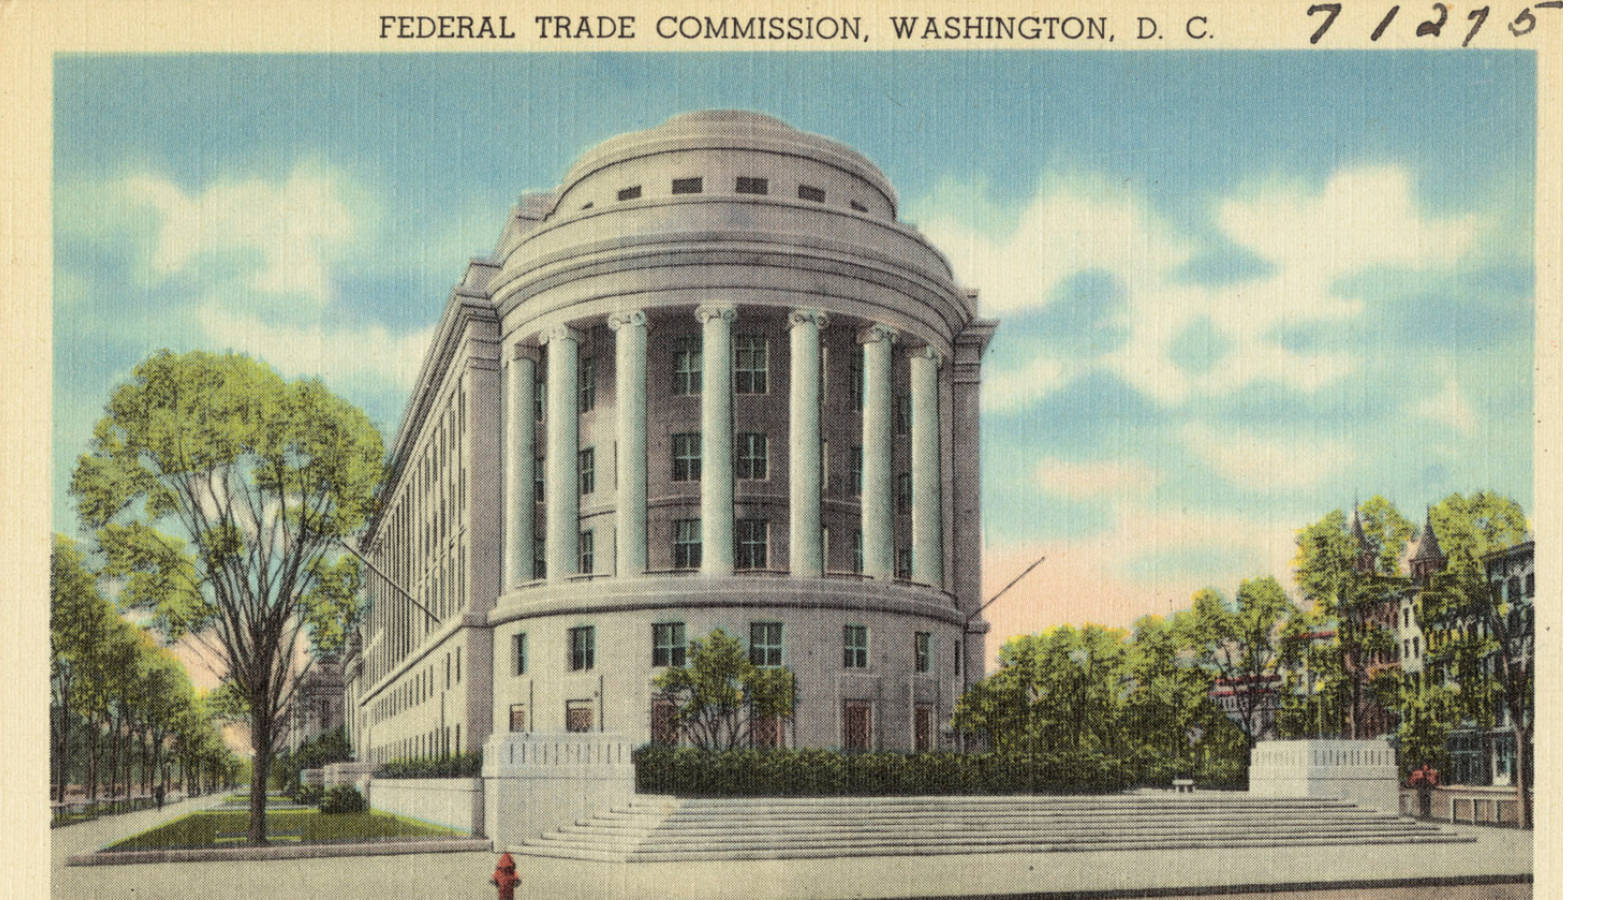 Old postcard of FTC building.